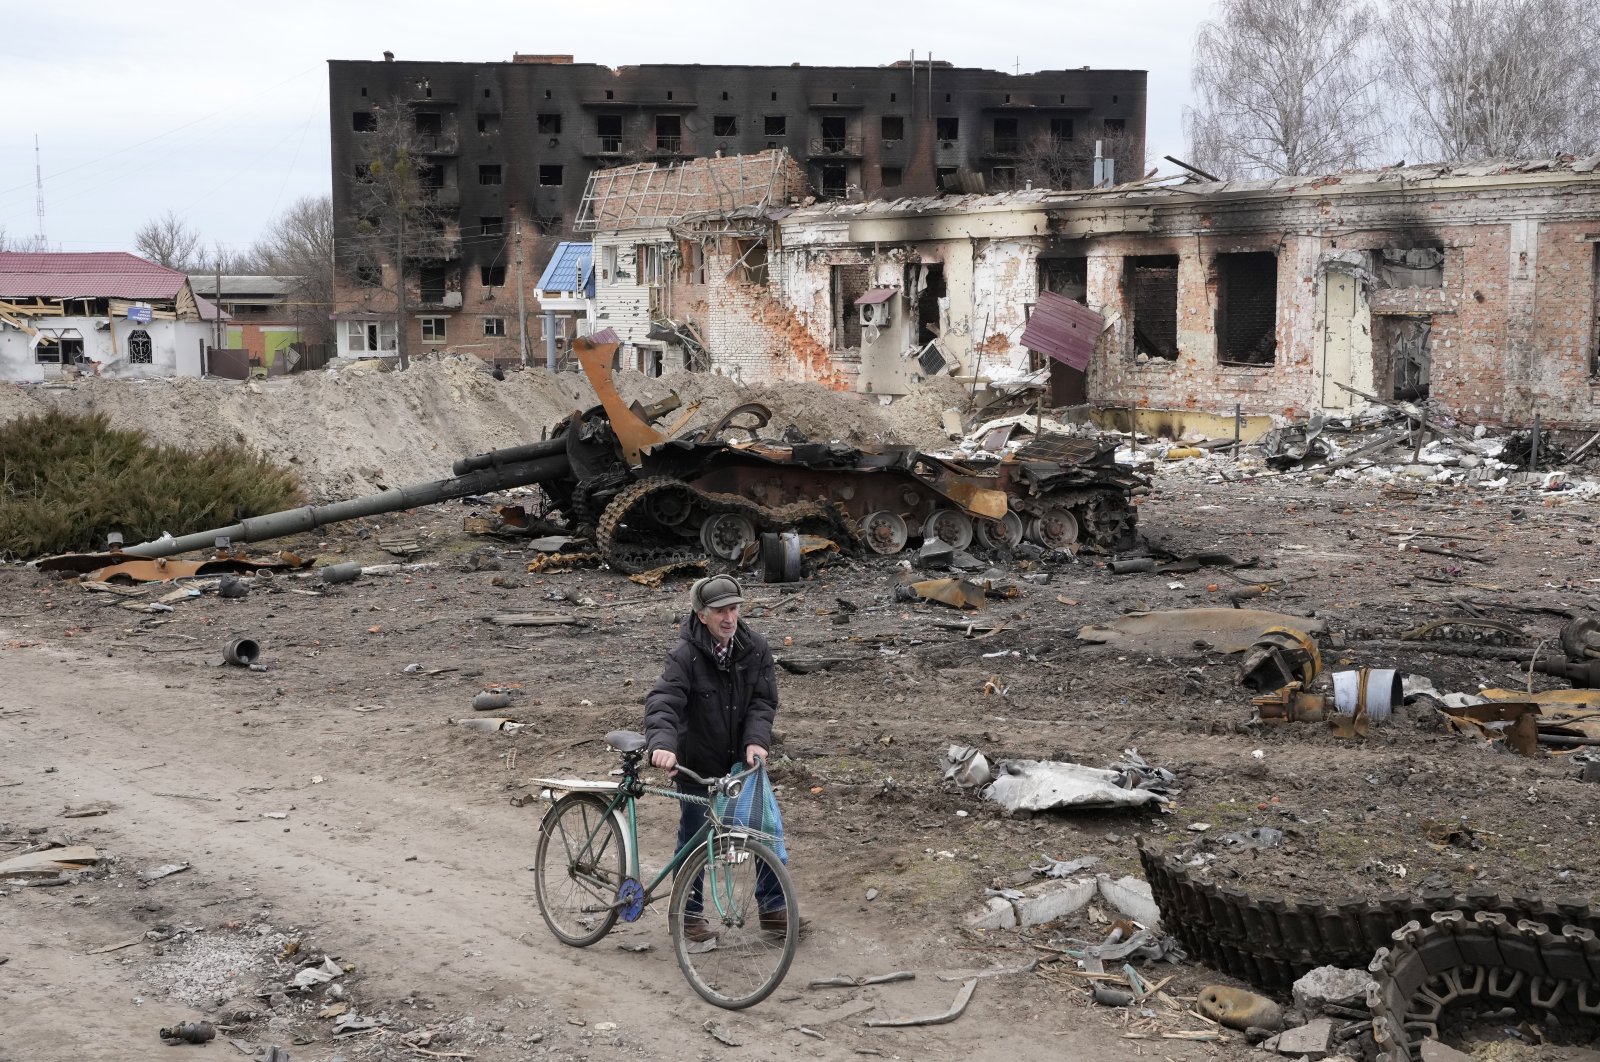 A local resident passes with his bicycle in front of damaged buildings and a tank in the town of Trostsyanets, some 400 kilometers (250 miles) east of the capital Kyiv, Ukraine, March 28, 2022. (AP Photo)